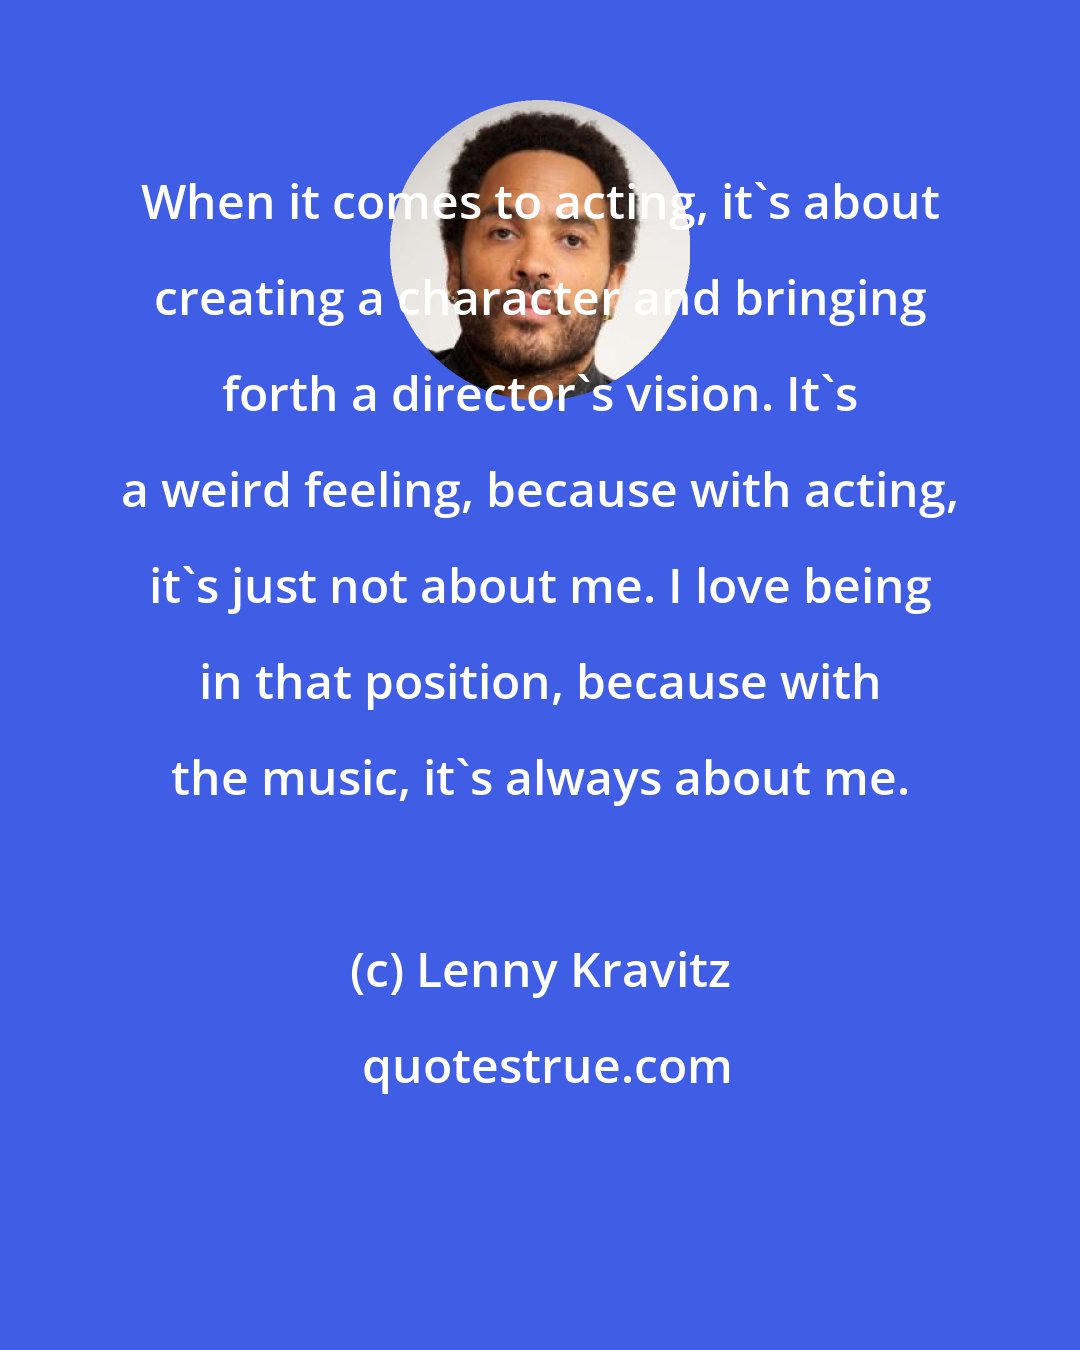 Lenny Kravitz: When it comes to acting, it's about creating a character and bringing forth a director's vision. It's a weird feeling, because with acting, it's just not about me. I love being in that position, because with the music, it's always about me.